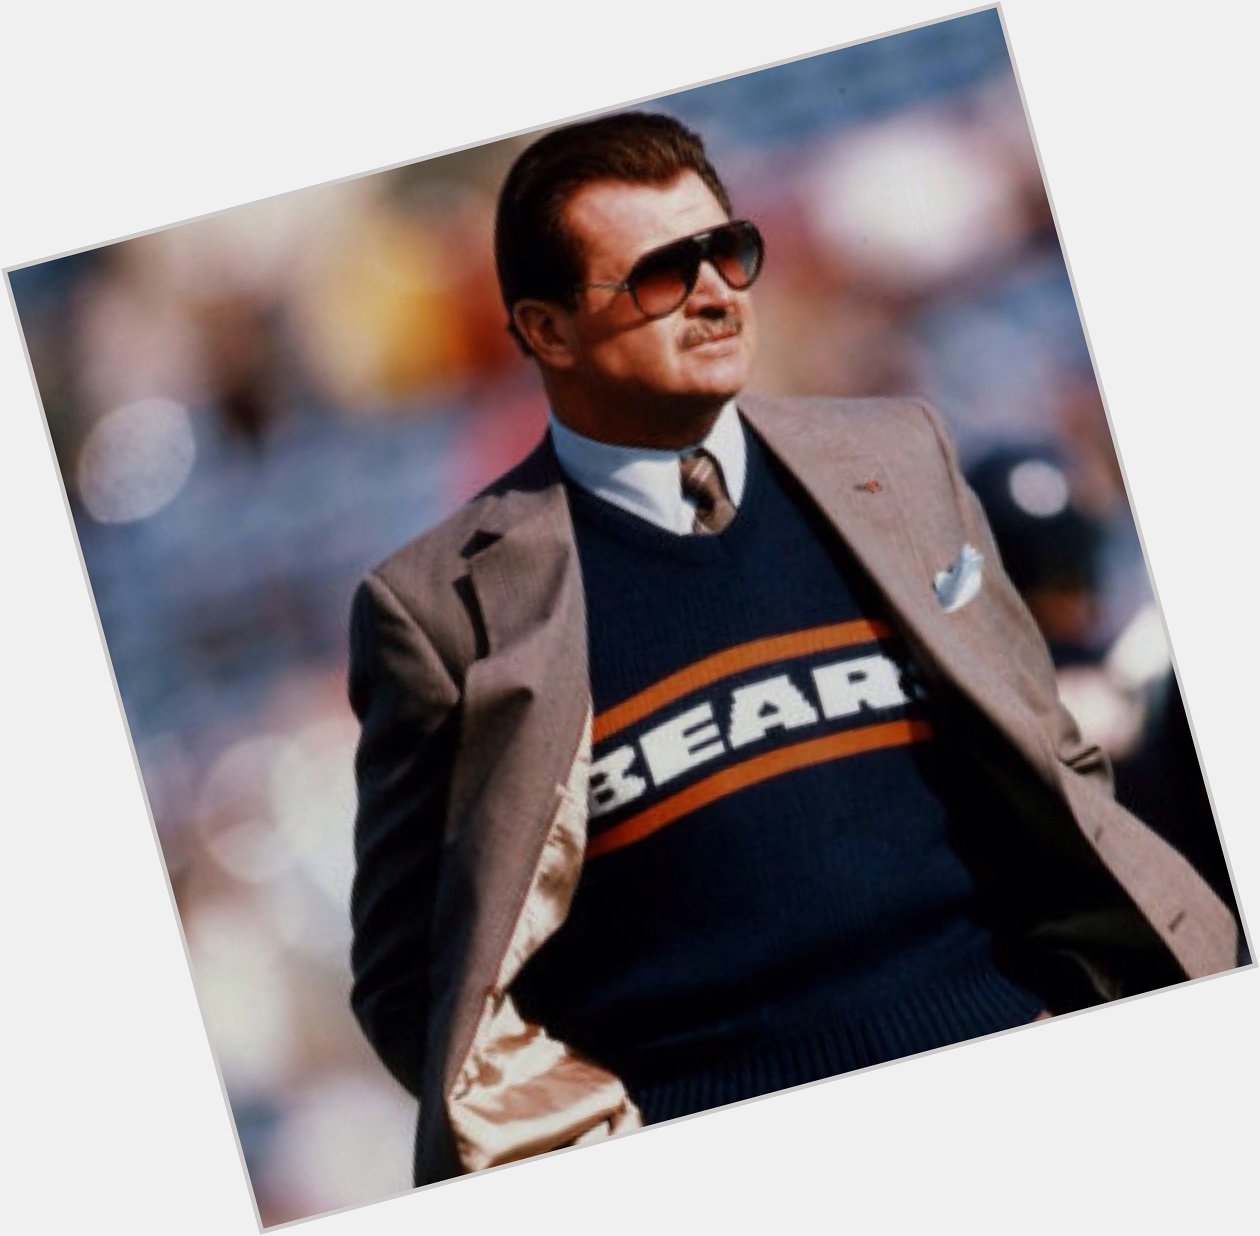 Happy Birthday to Mike Ditka, who could wear anything and make it look badass   